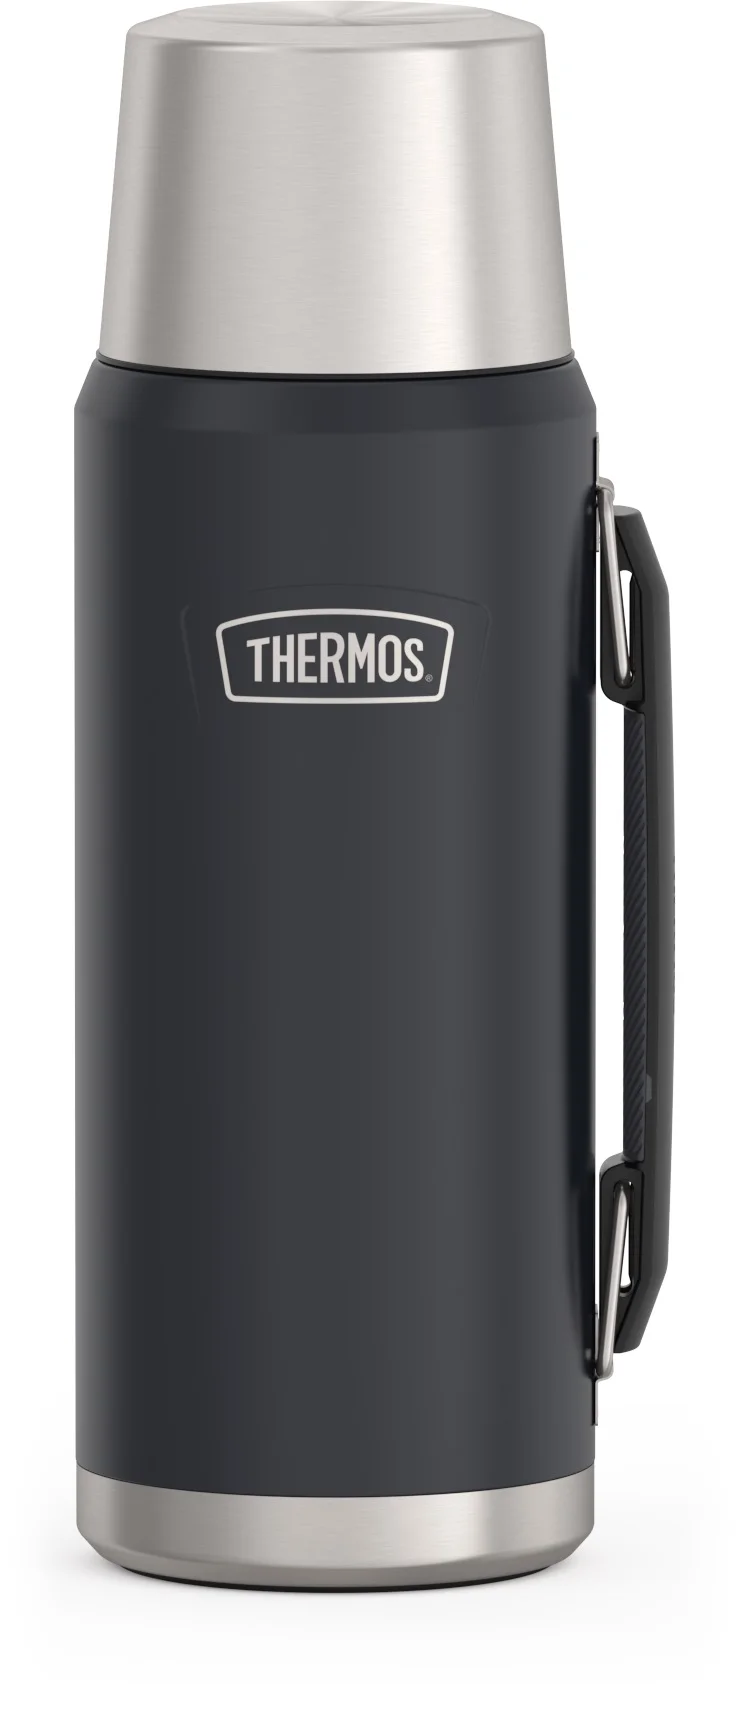 Thermos Stainless ICON Isoleerfles - Graphite Mat - 1,2l